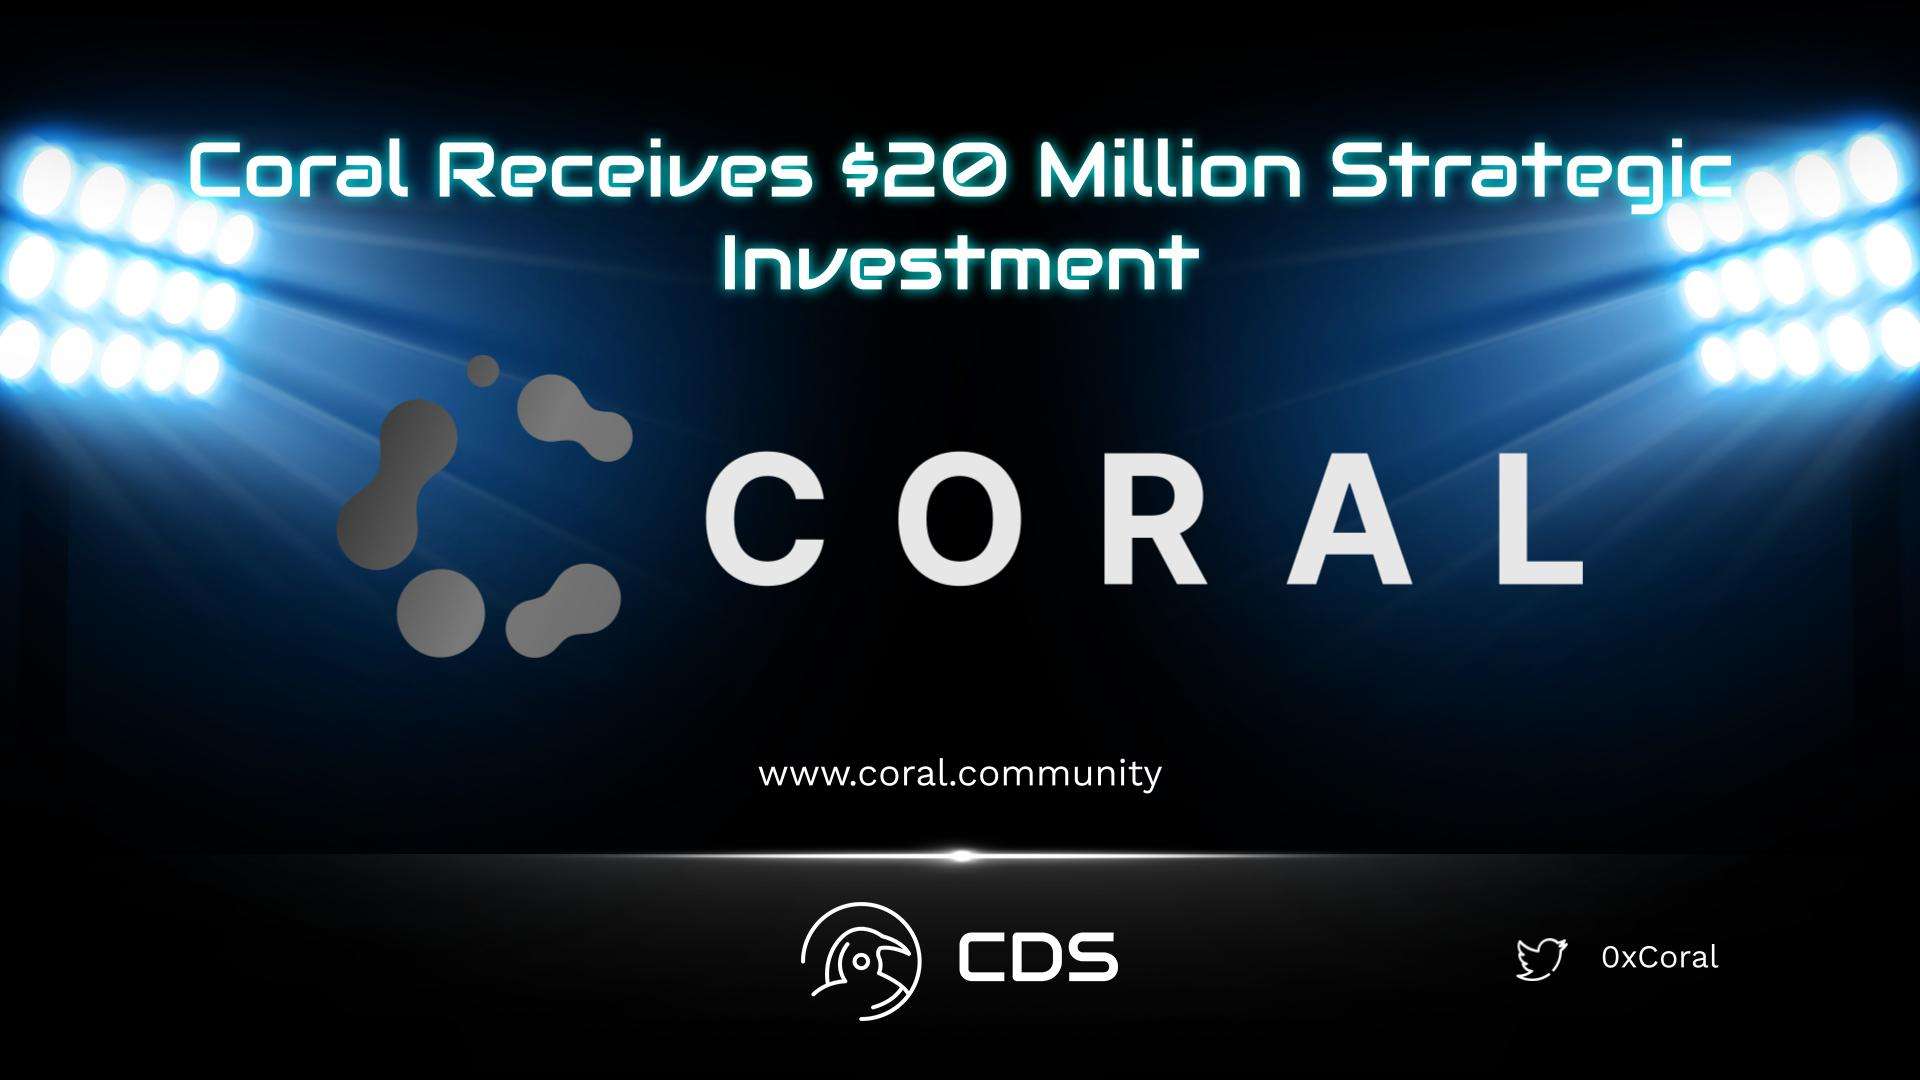 Coral Receives $20 Million Strategic Investment